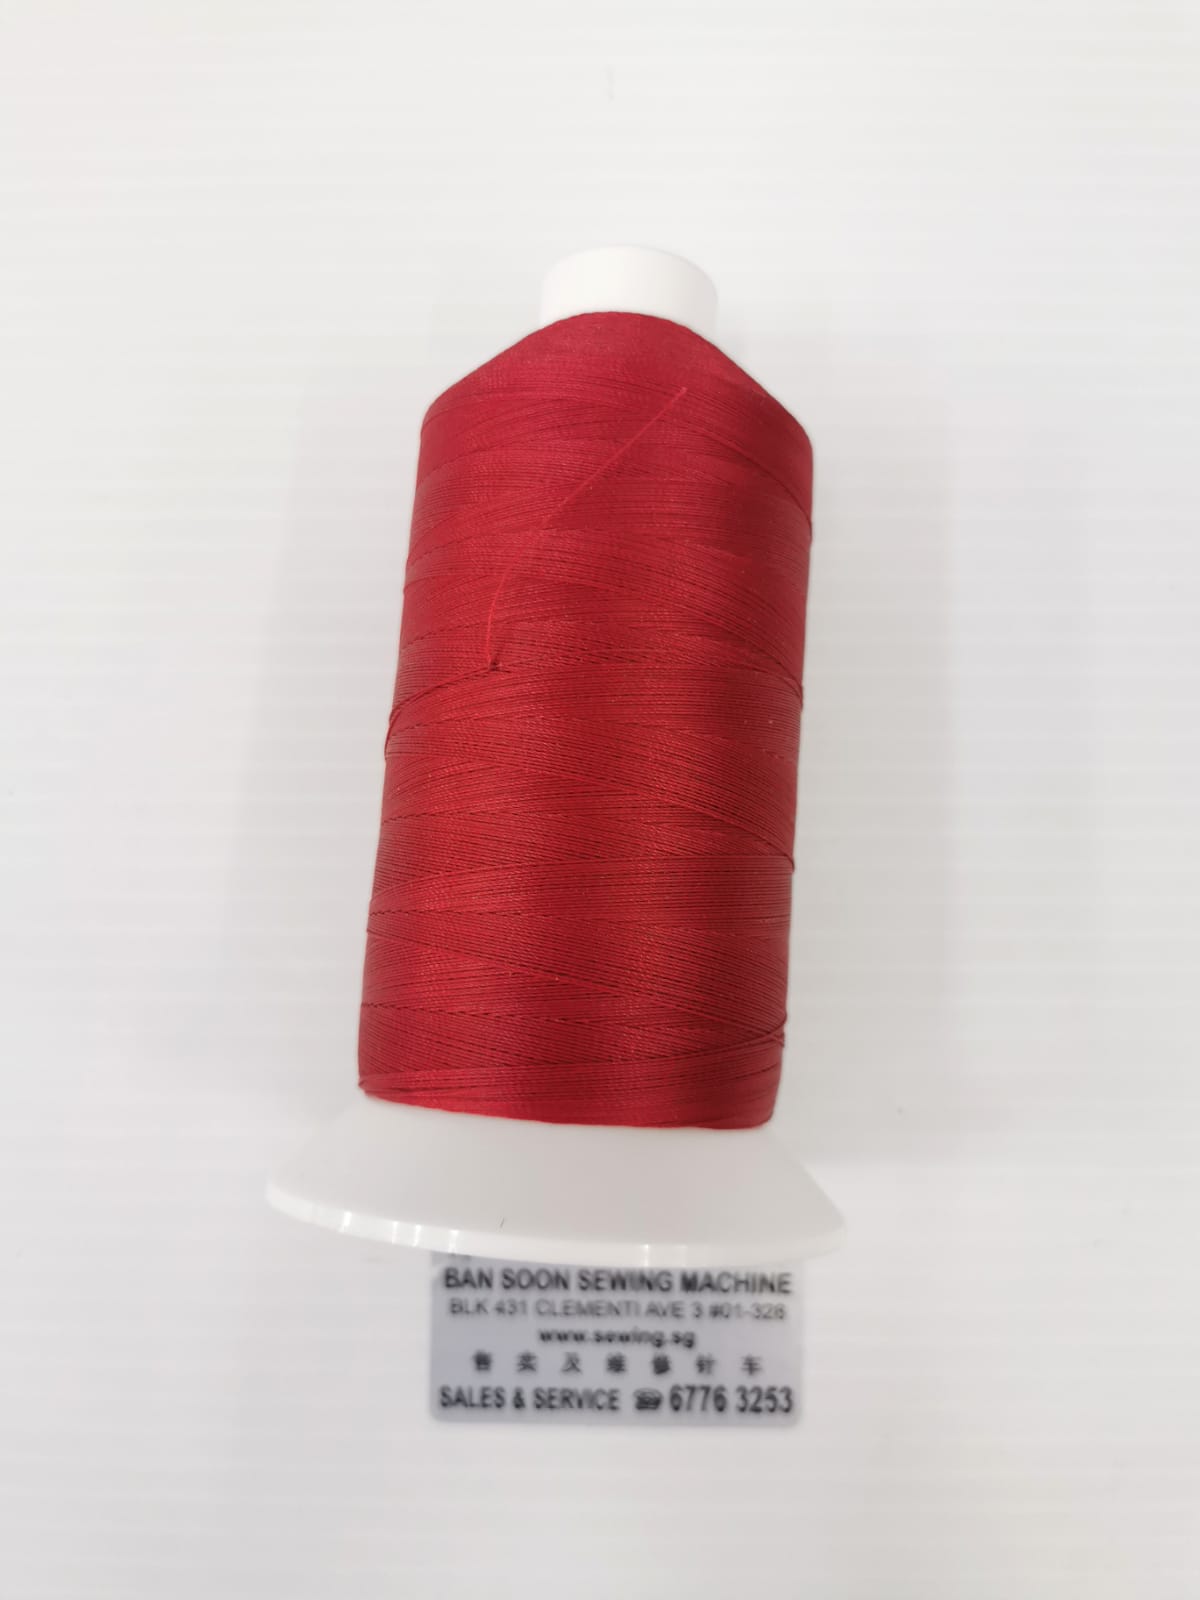 OUTDOOR SEWING THREADS, UV Resistance sewing thread. Specially produced for Shelters, Awnings and all outdoor sewing applications. SERABOND 30 V92 Red